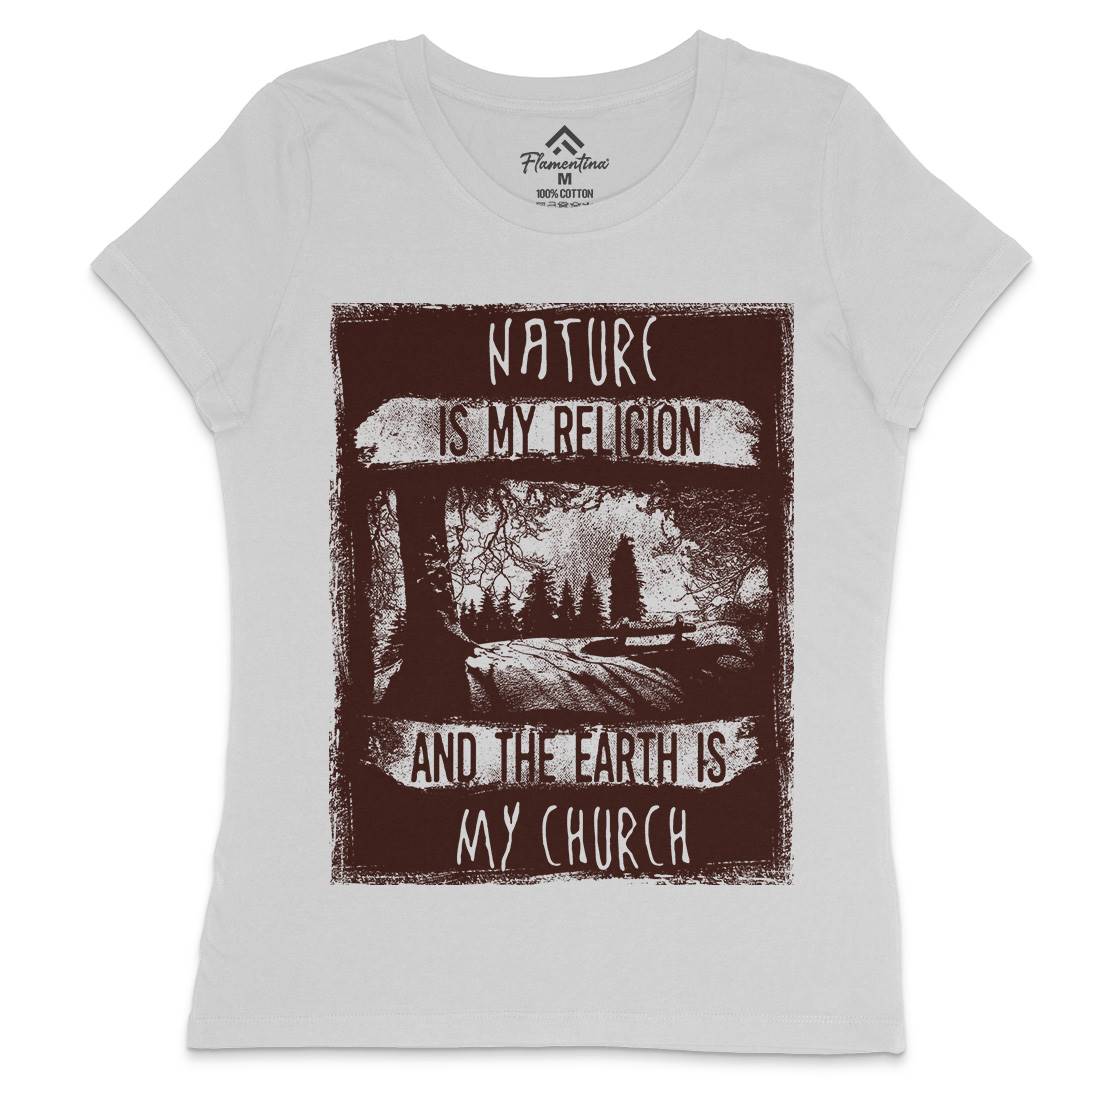 Is My Religion Womens Crew Neck T-Shirt Nature C967